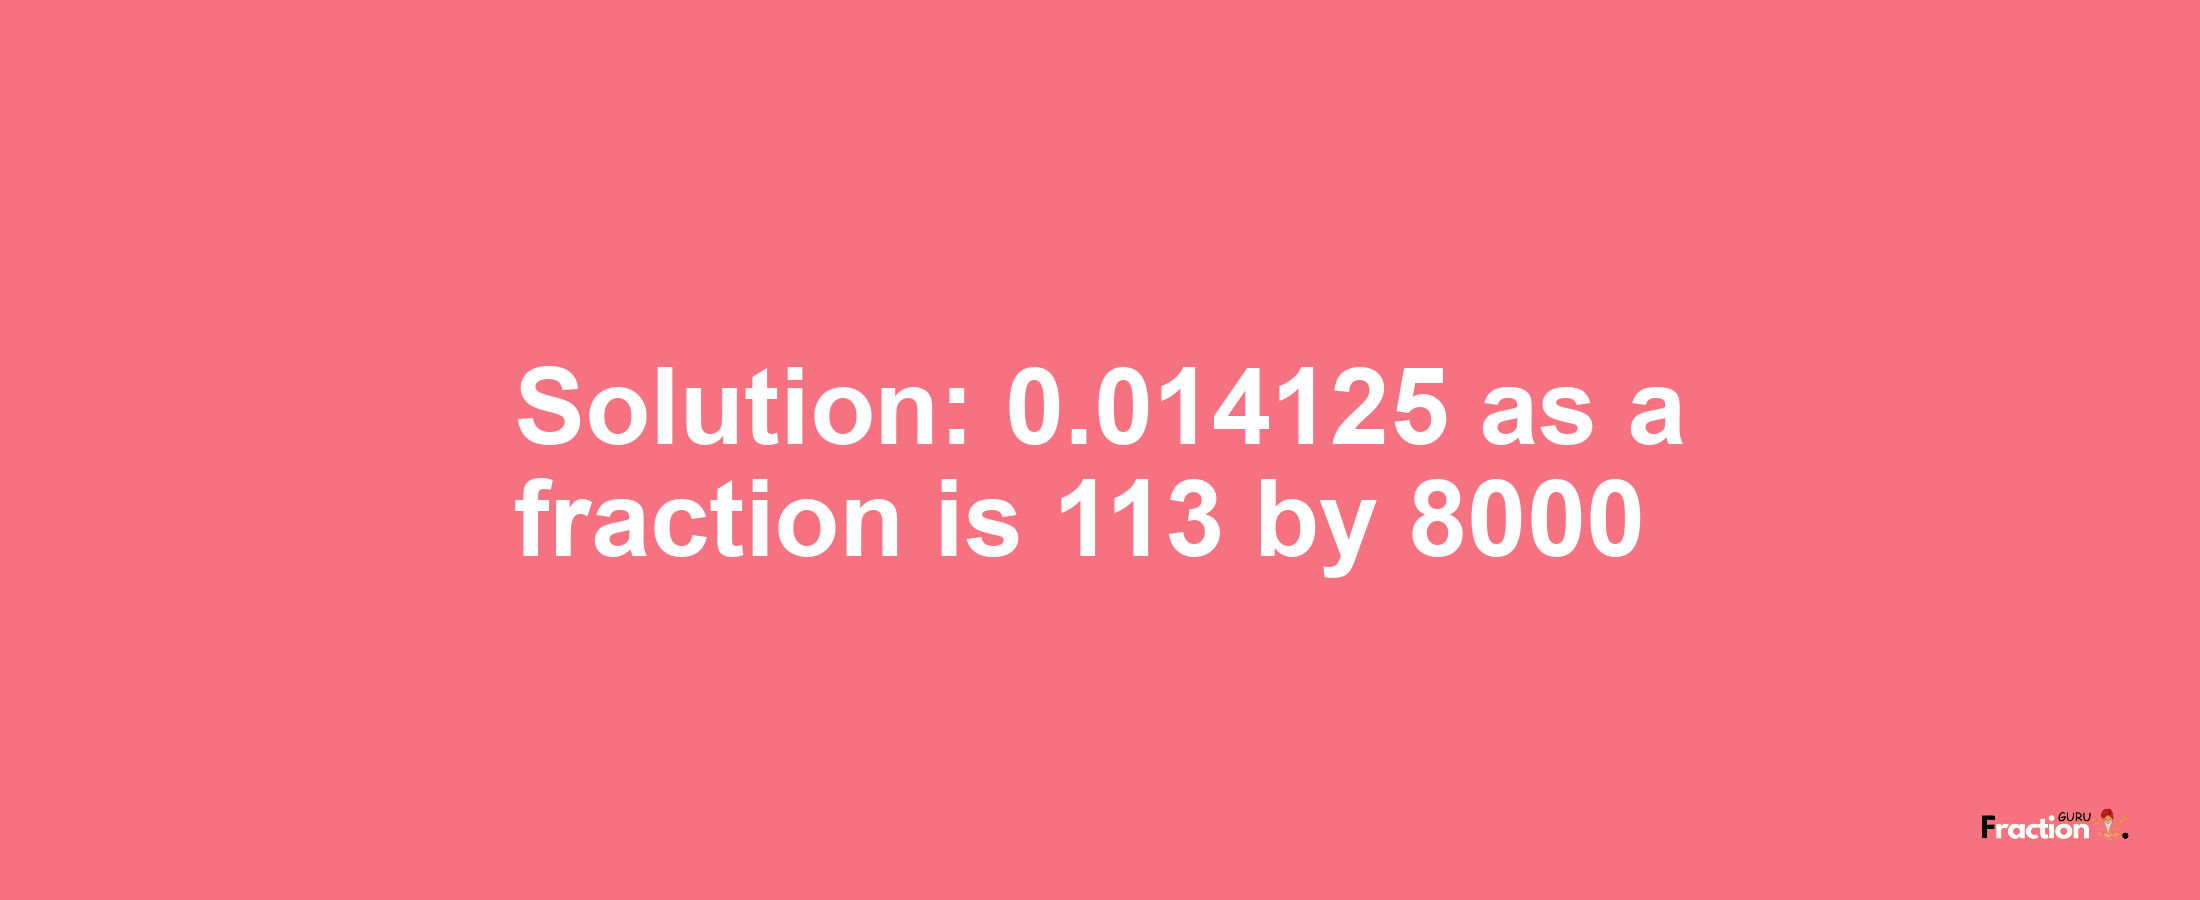 Solution:0.014125 as a fraction is 113/8000